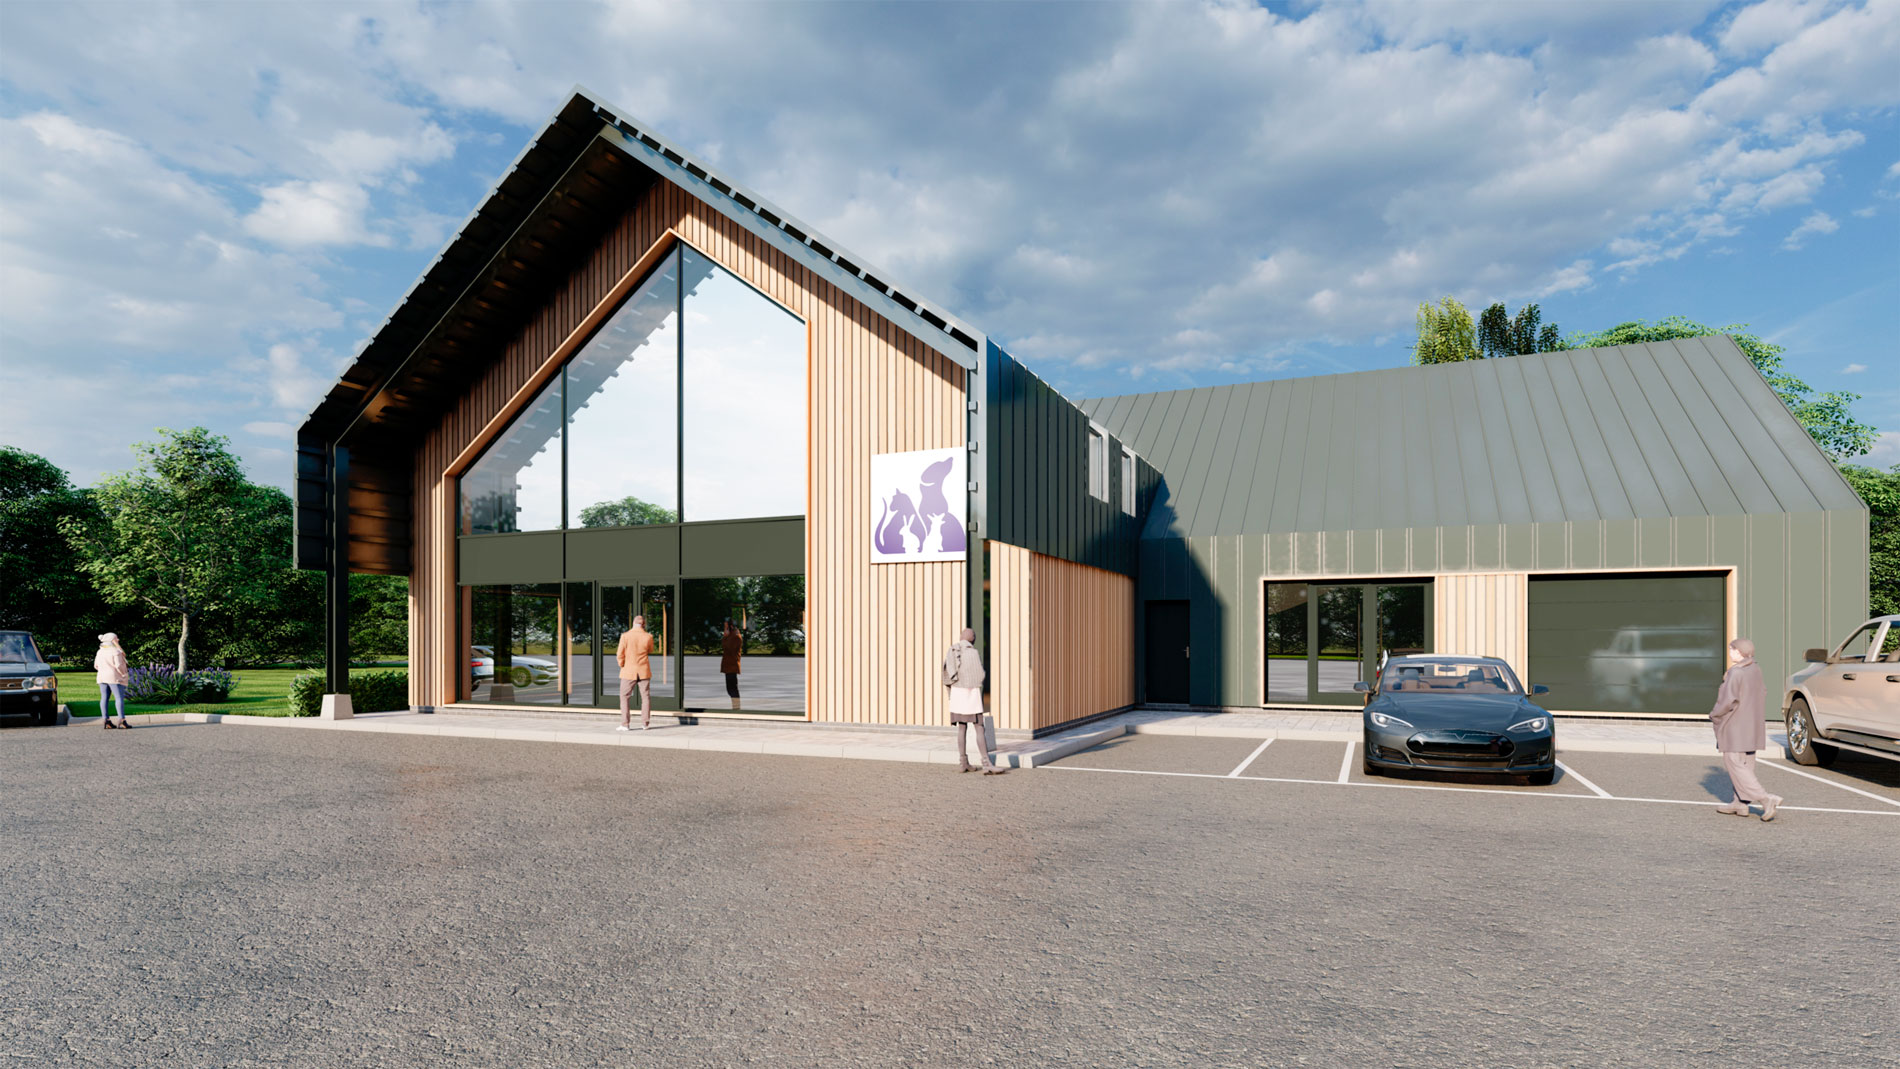 Digital visualisation of the front of the veterinary centre, shows a large triangle wooden front of the left, with a large glass entrance and doors, then a shorted area to the right with car parking spaces on the front